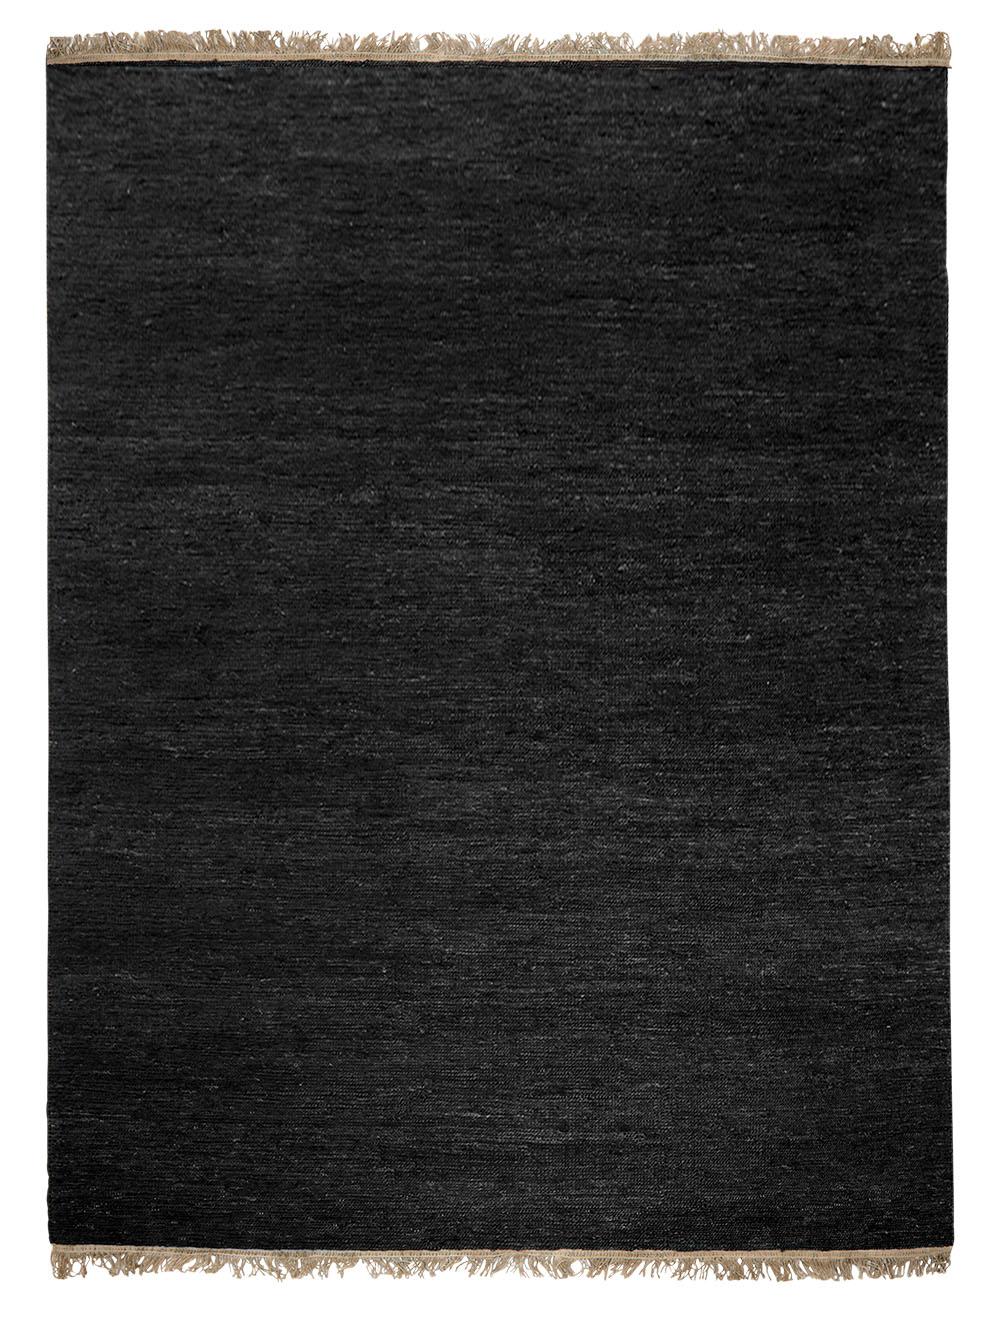 Black Sumace carpet with fringes by Massimo Copenhagen
Handknotted
Materials: 100% Hemp
Dimensions: W 250 x H 300 cm
Available colors: Natural, Natural with Fringes, Black, Black with Fringes, and Navy.
Other dimensions are available: 170x240